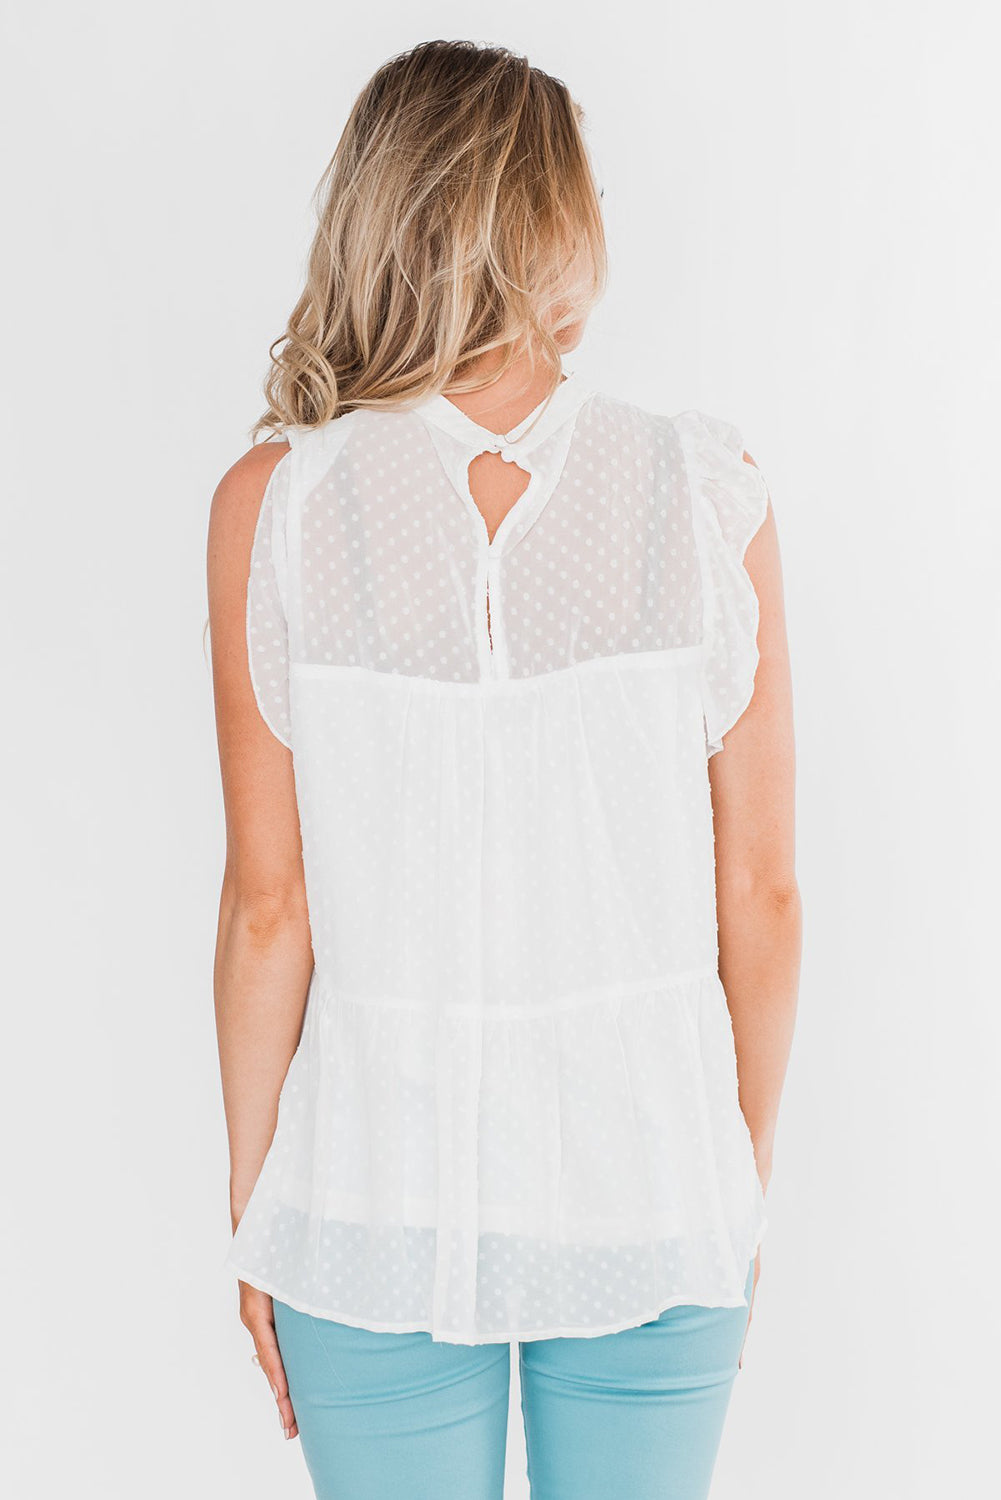 Lace Detail Dotted Print Sleeveless Top